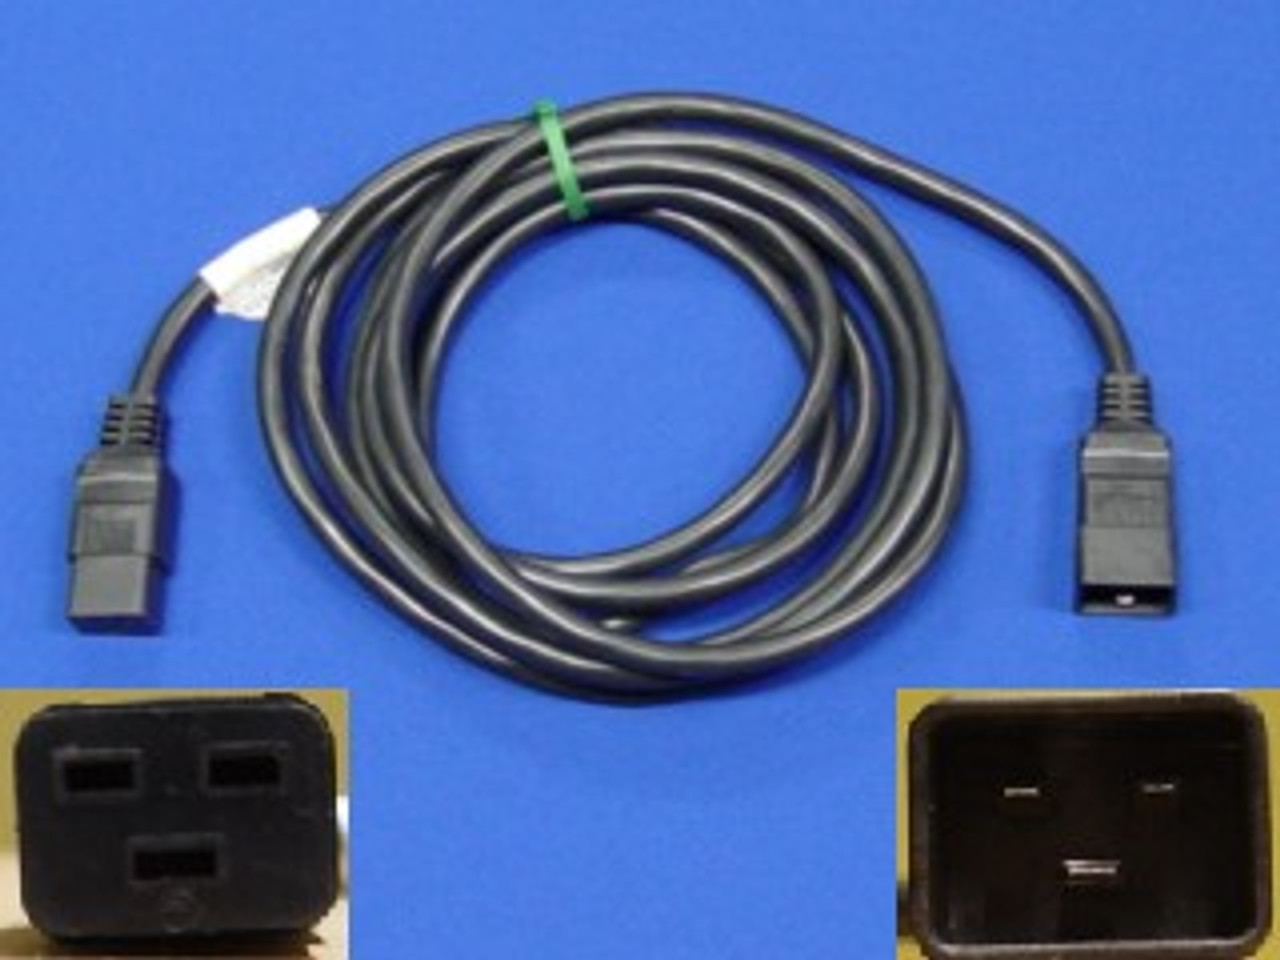 PWR-CORD OPT-926 3-COND 4.5-M-LG ROHS - 8121-0806